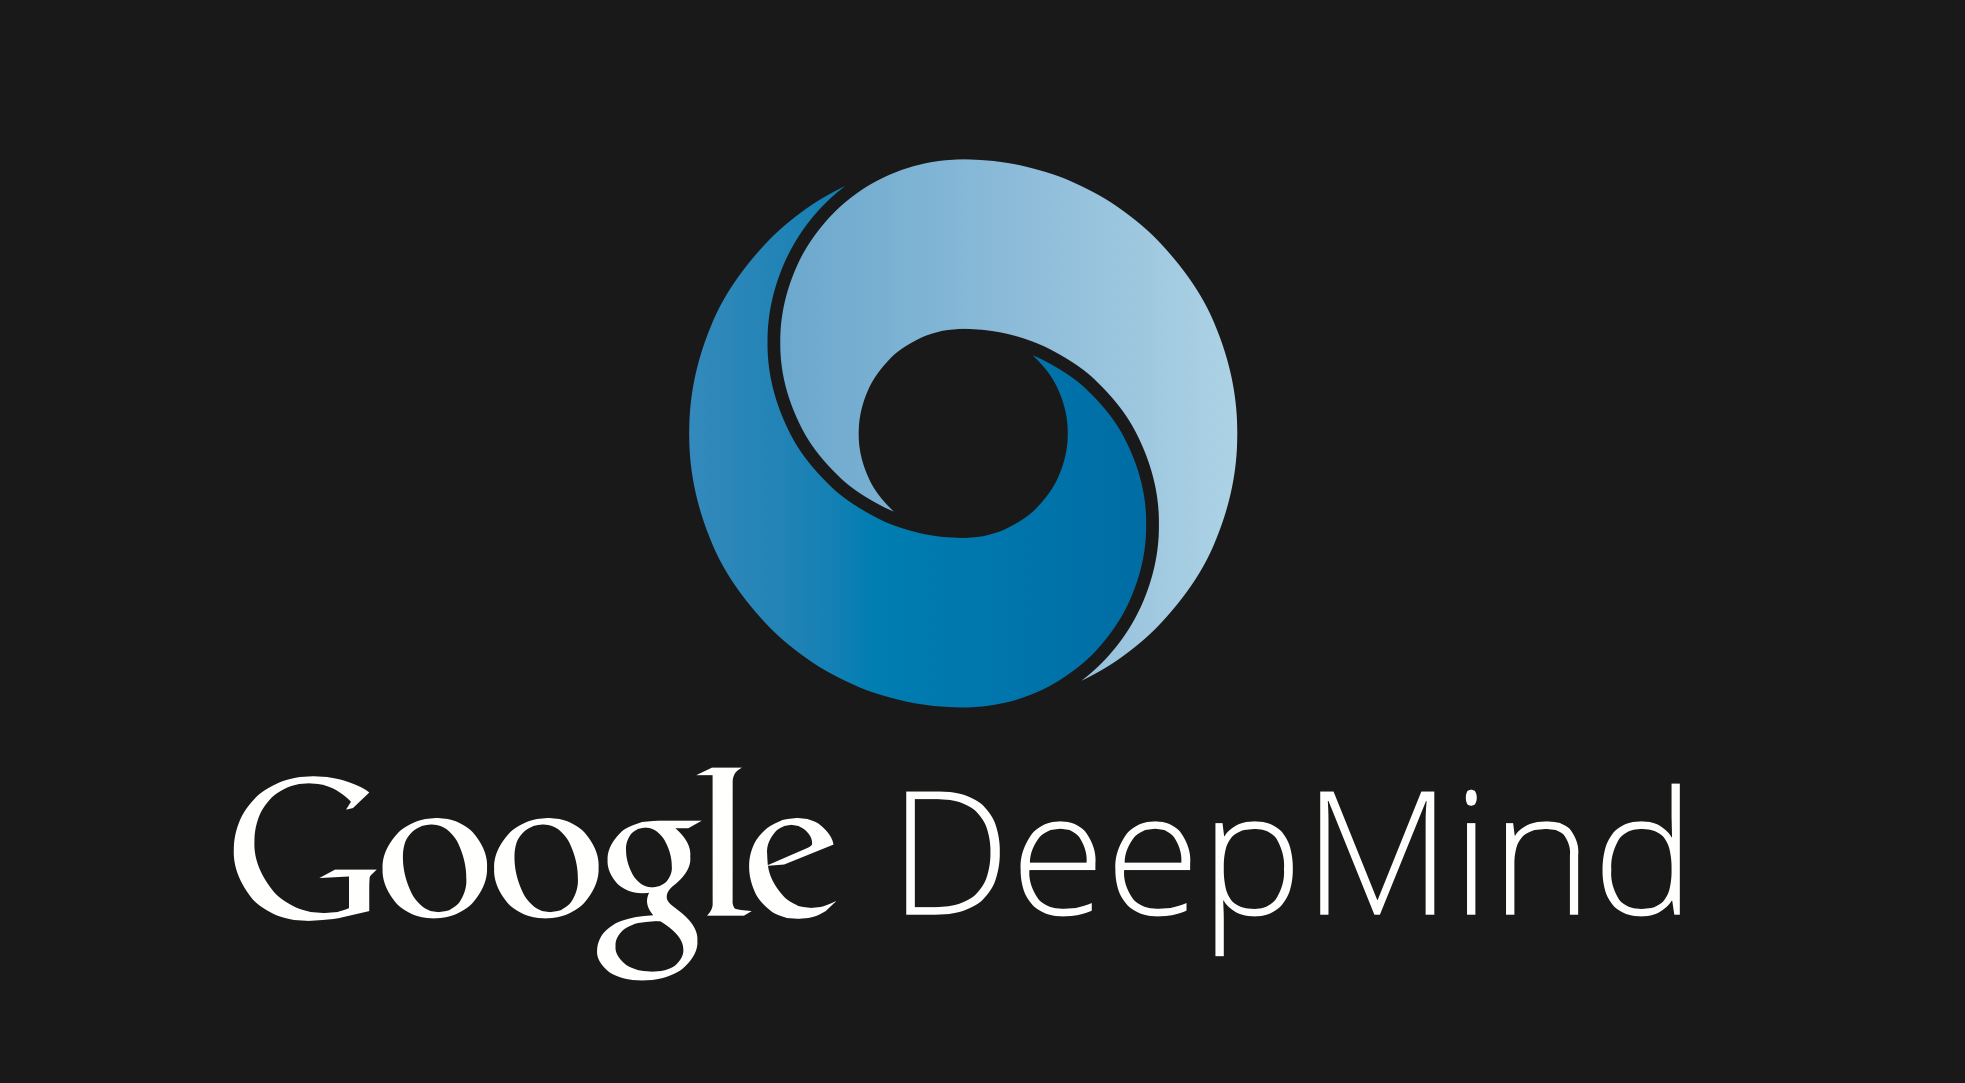 Google's DeepMind: When AI Can Contemplate Competition Or Cooperation